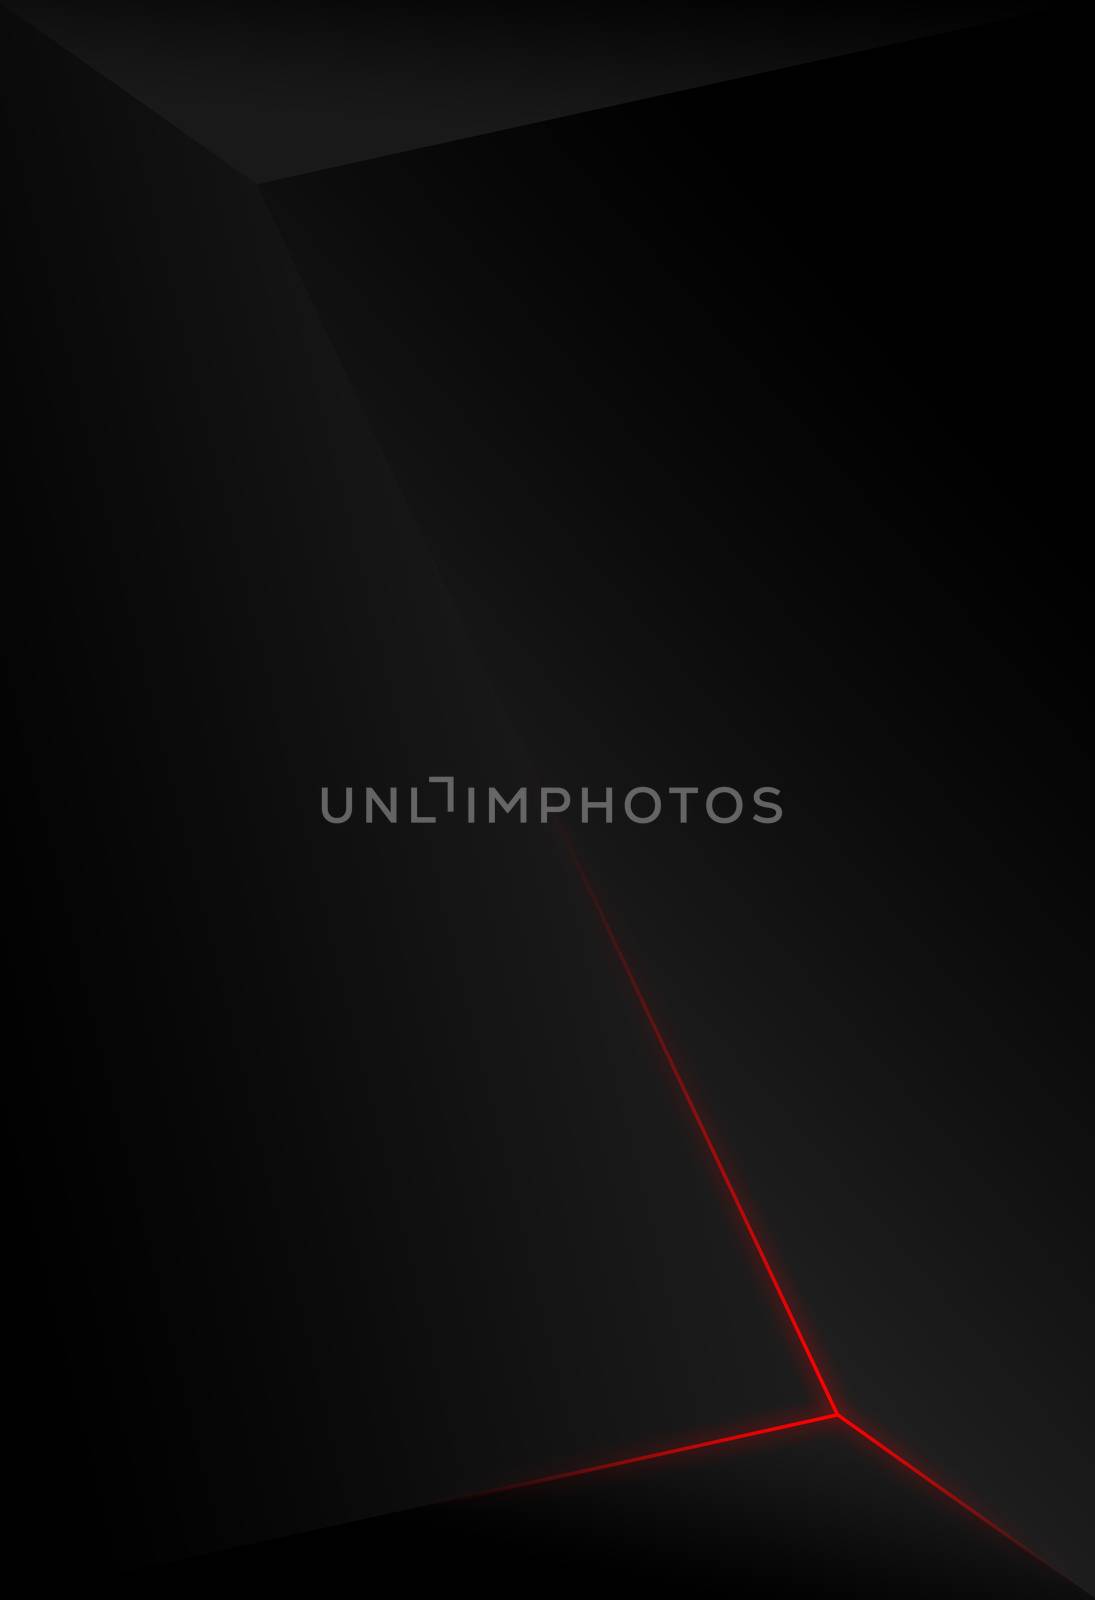 Black polygon background with diagonal graphic red bright